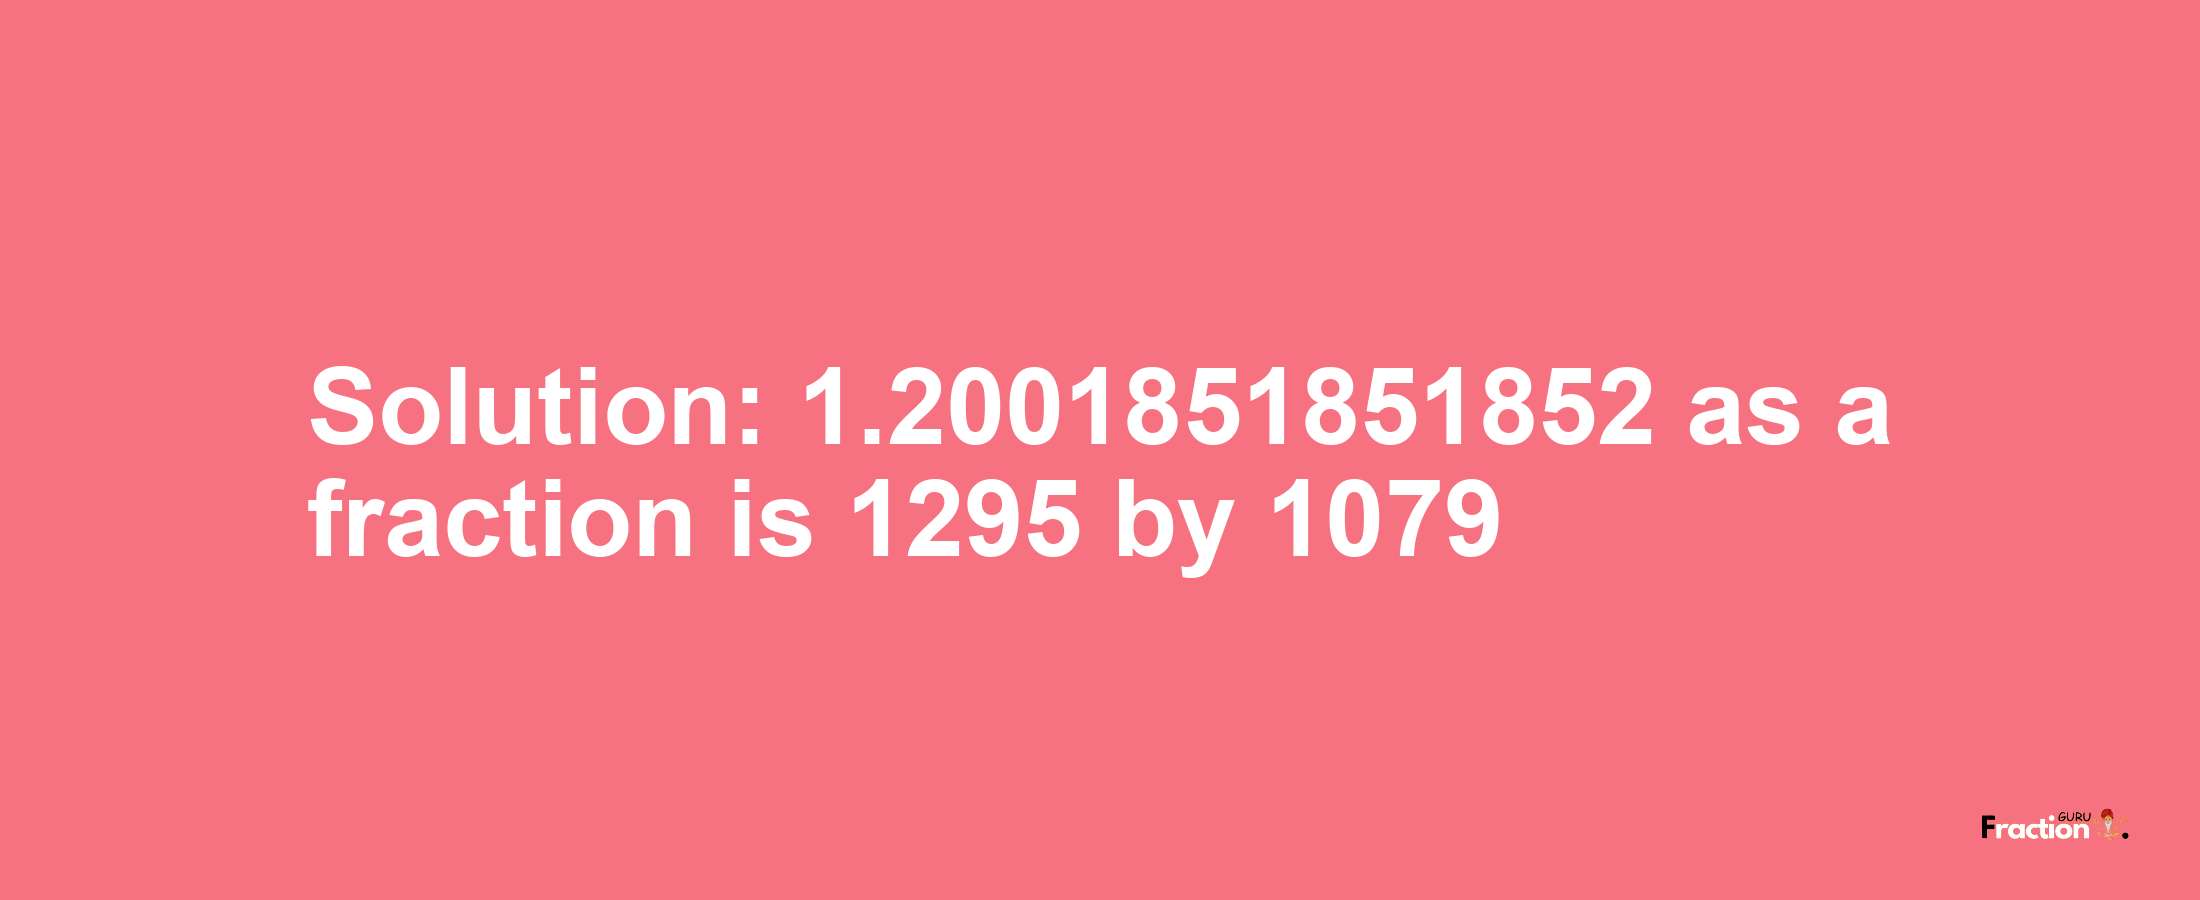 Solution:1.2001851851852 as a fraction is 1295/1079